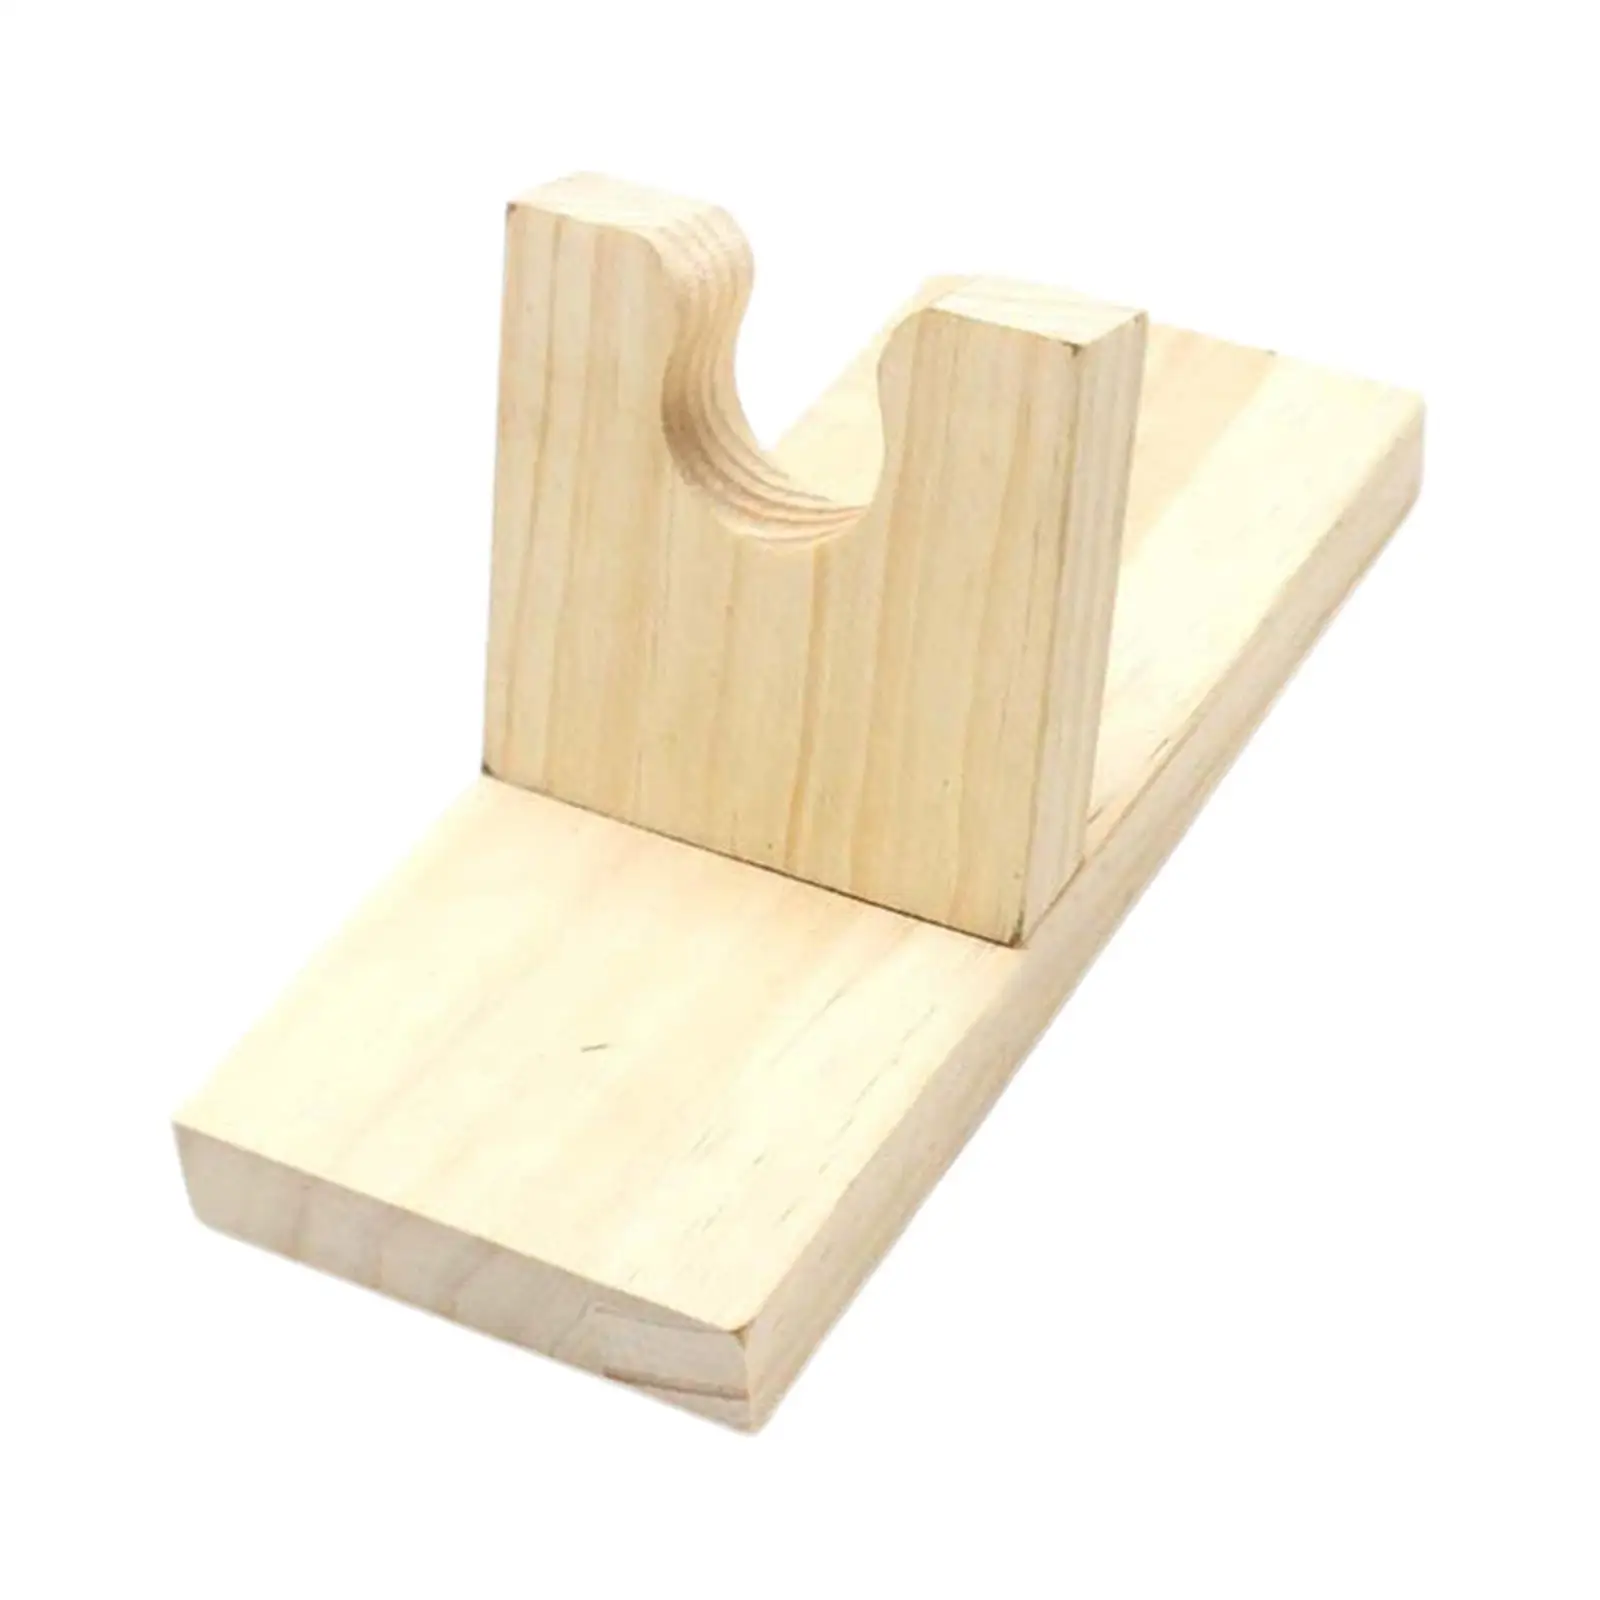 Wooden Hot Melt Glue Gun Support Stand Repair Tools Storage Rack Repair Tools Durable Quick Glue Machine Base for Household Home